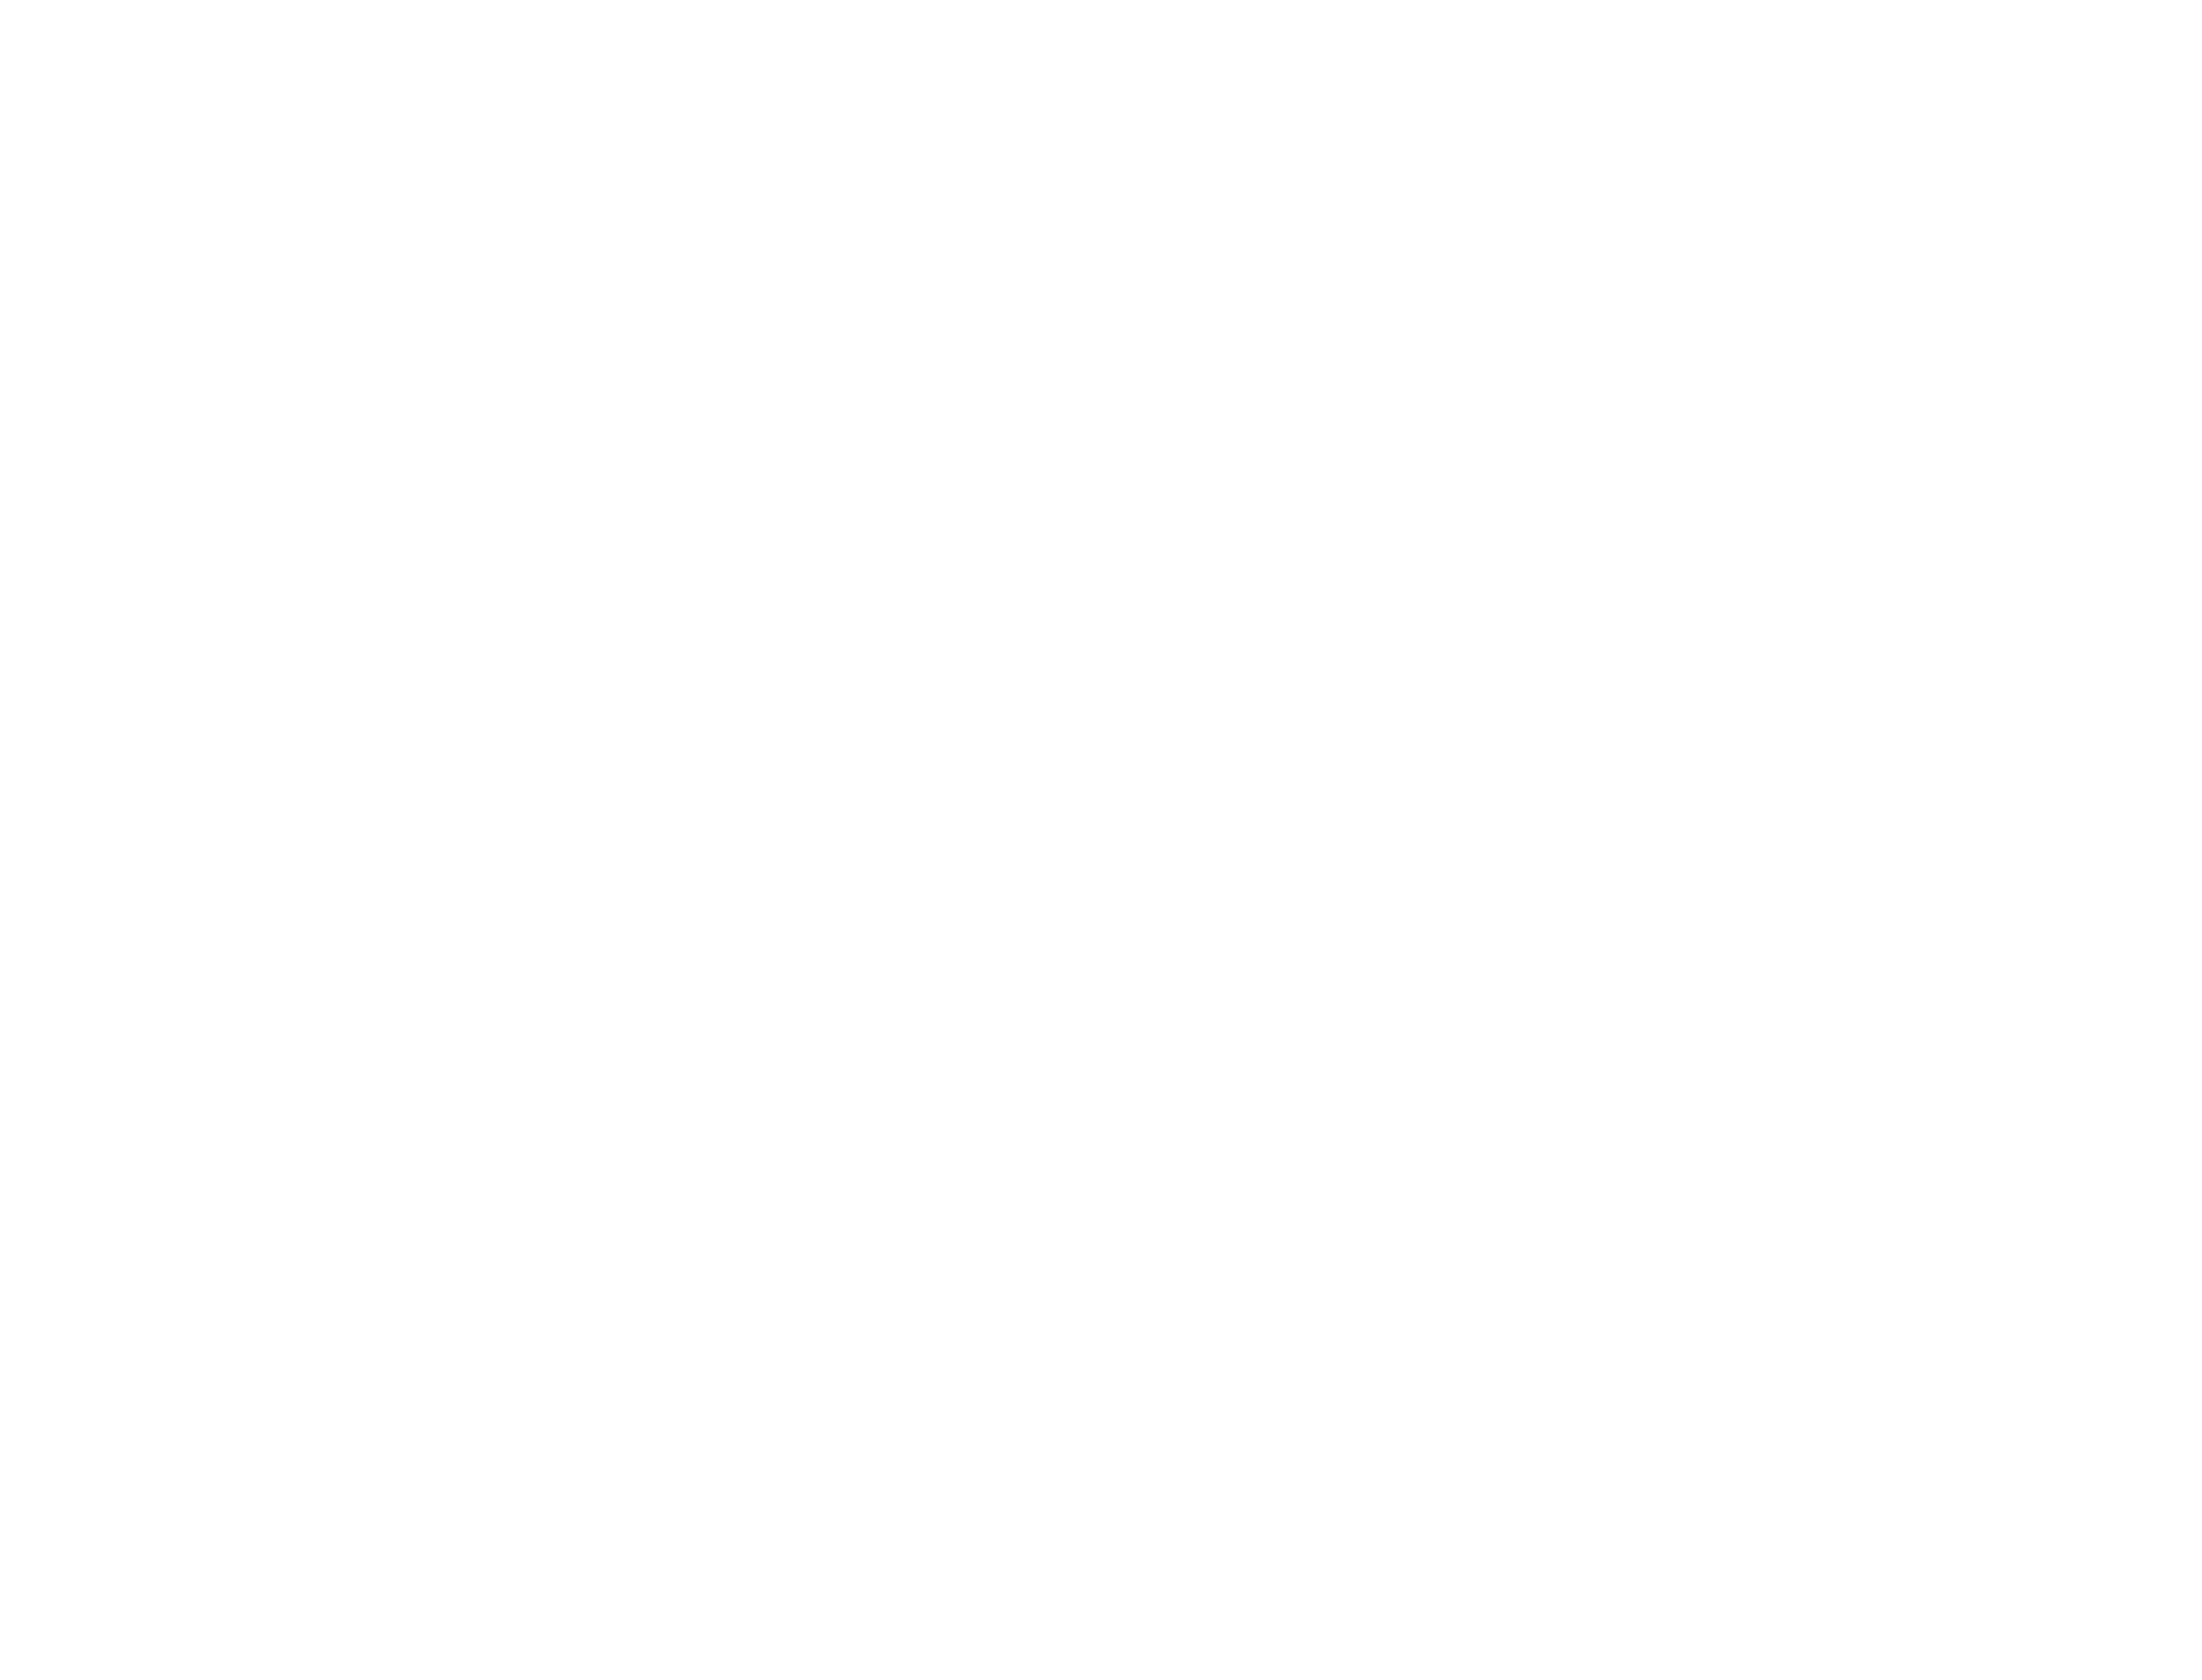 Affordable farmland with tremendous potential in northern Madagascar